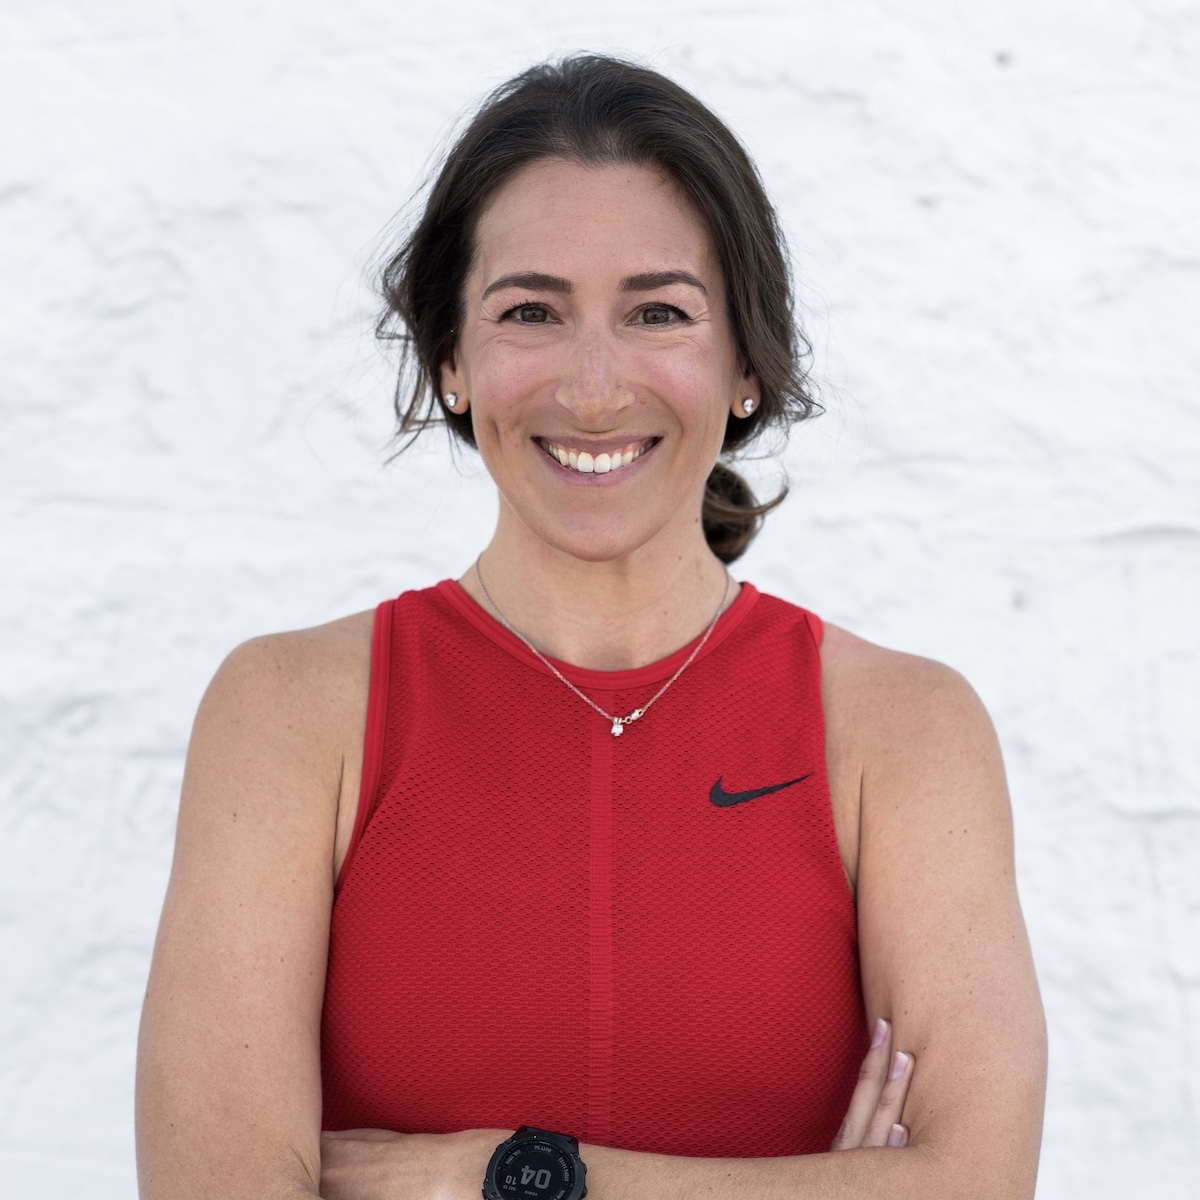 woman with brown hair in red nike top smiling